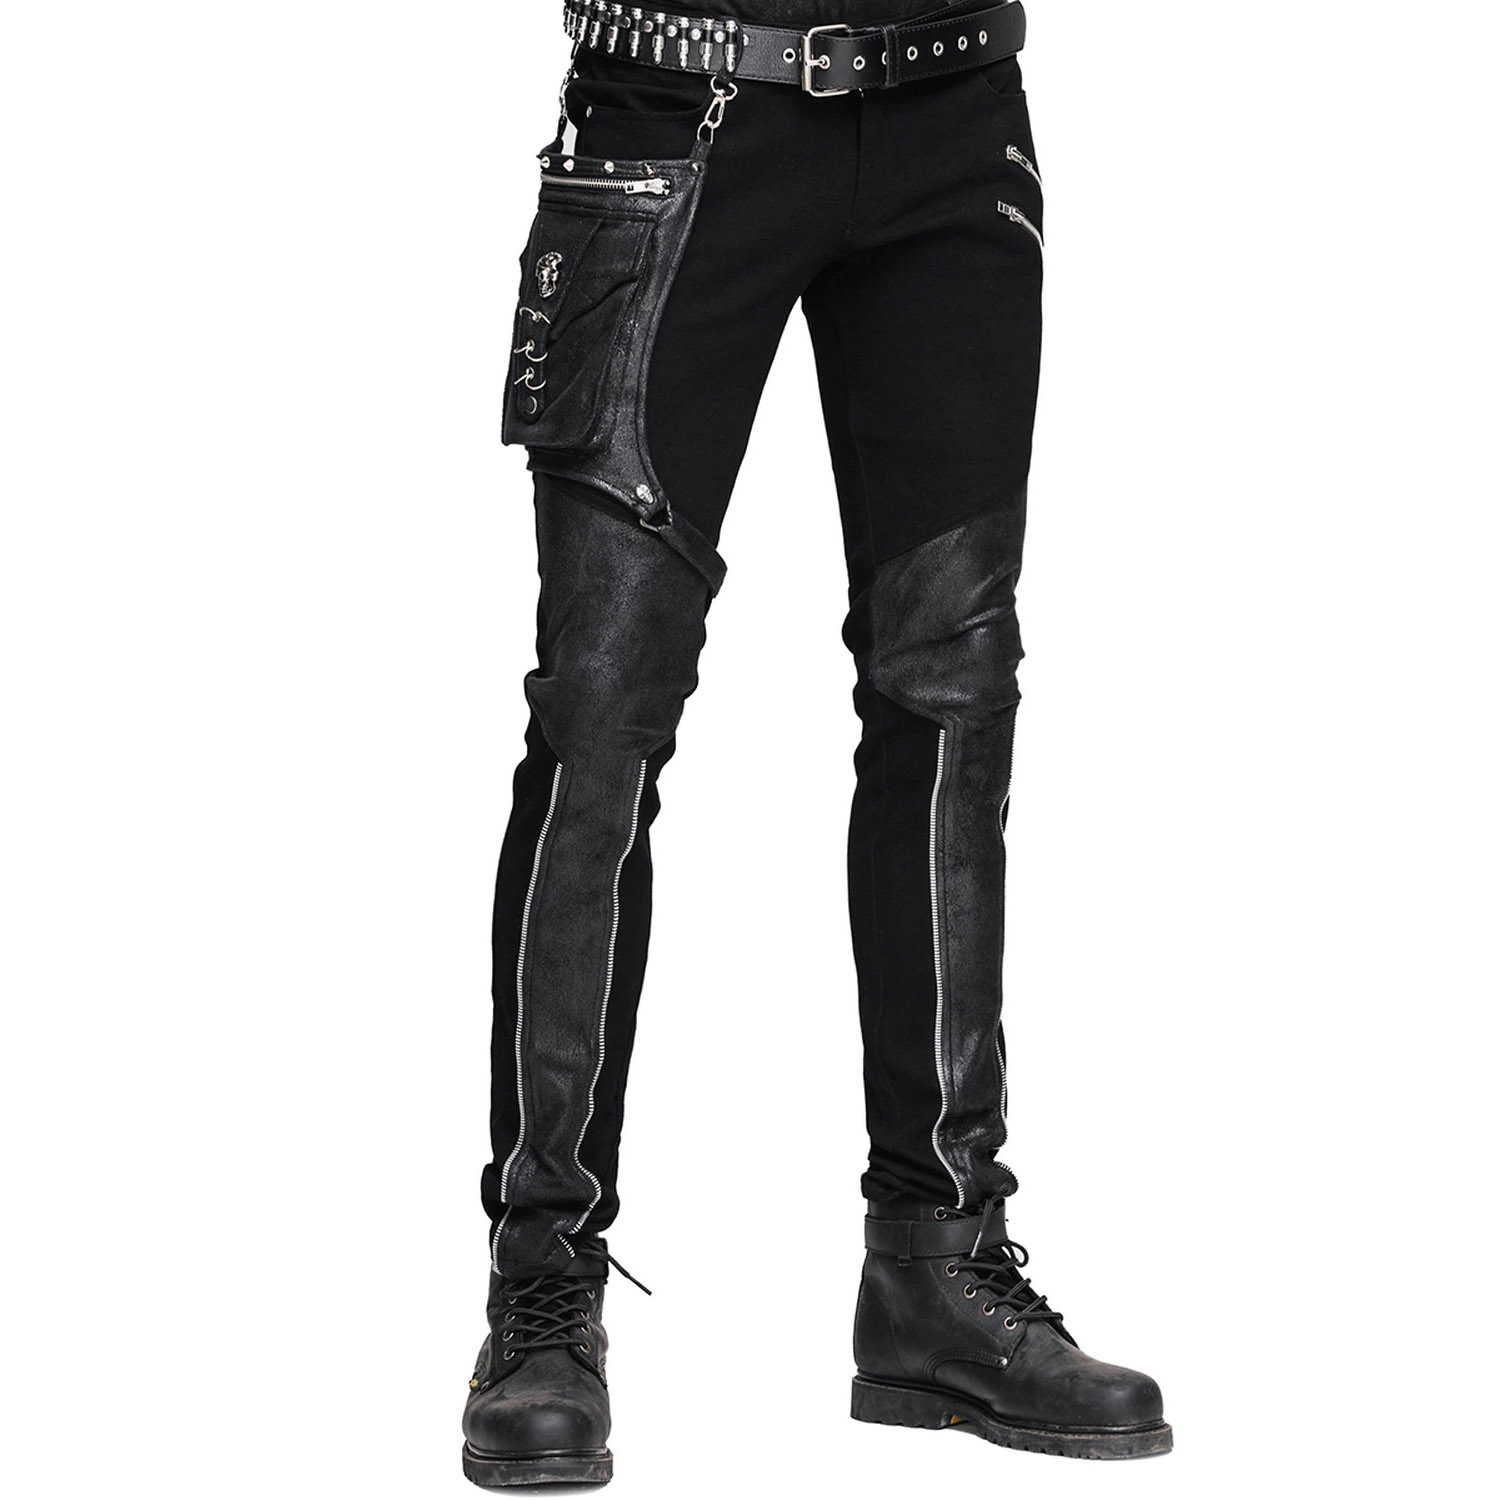 Embroidered Printed Cotton Men's Punk Pants – GTHIC